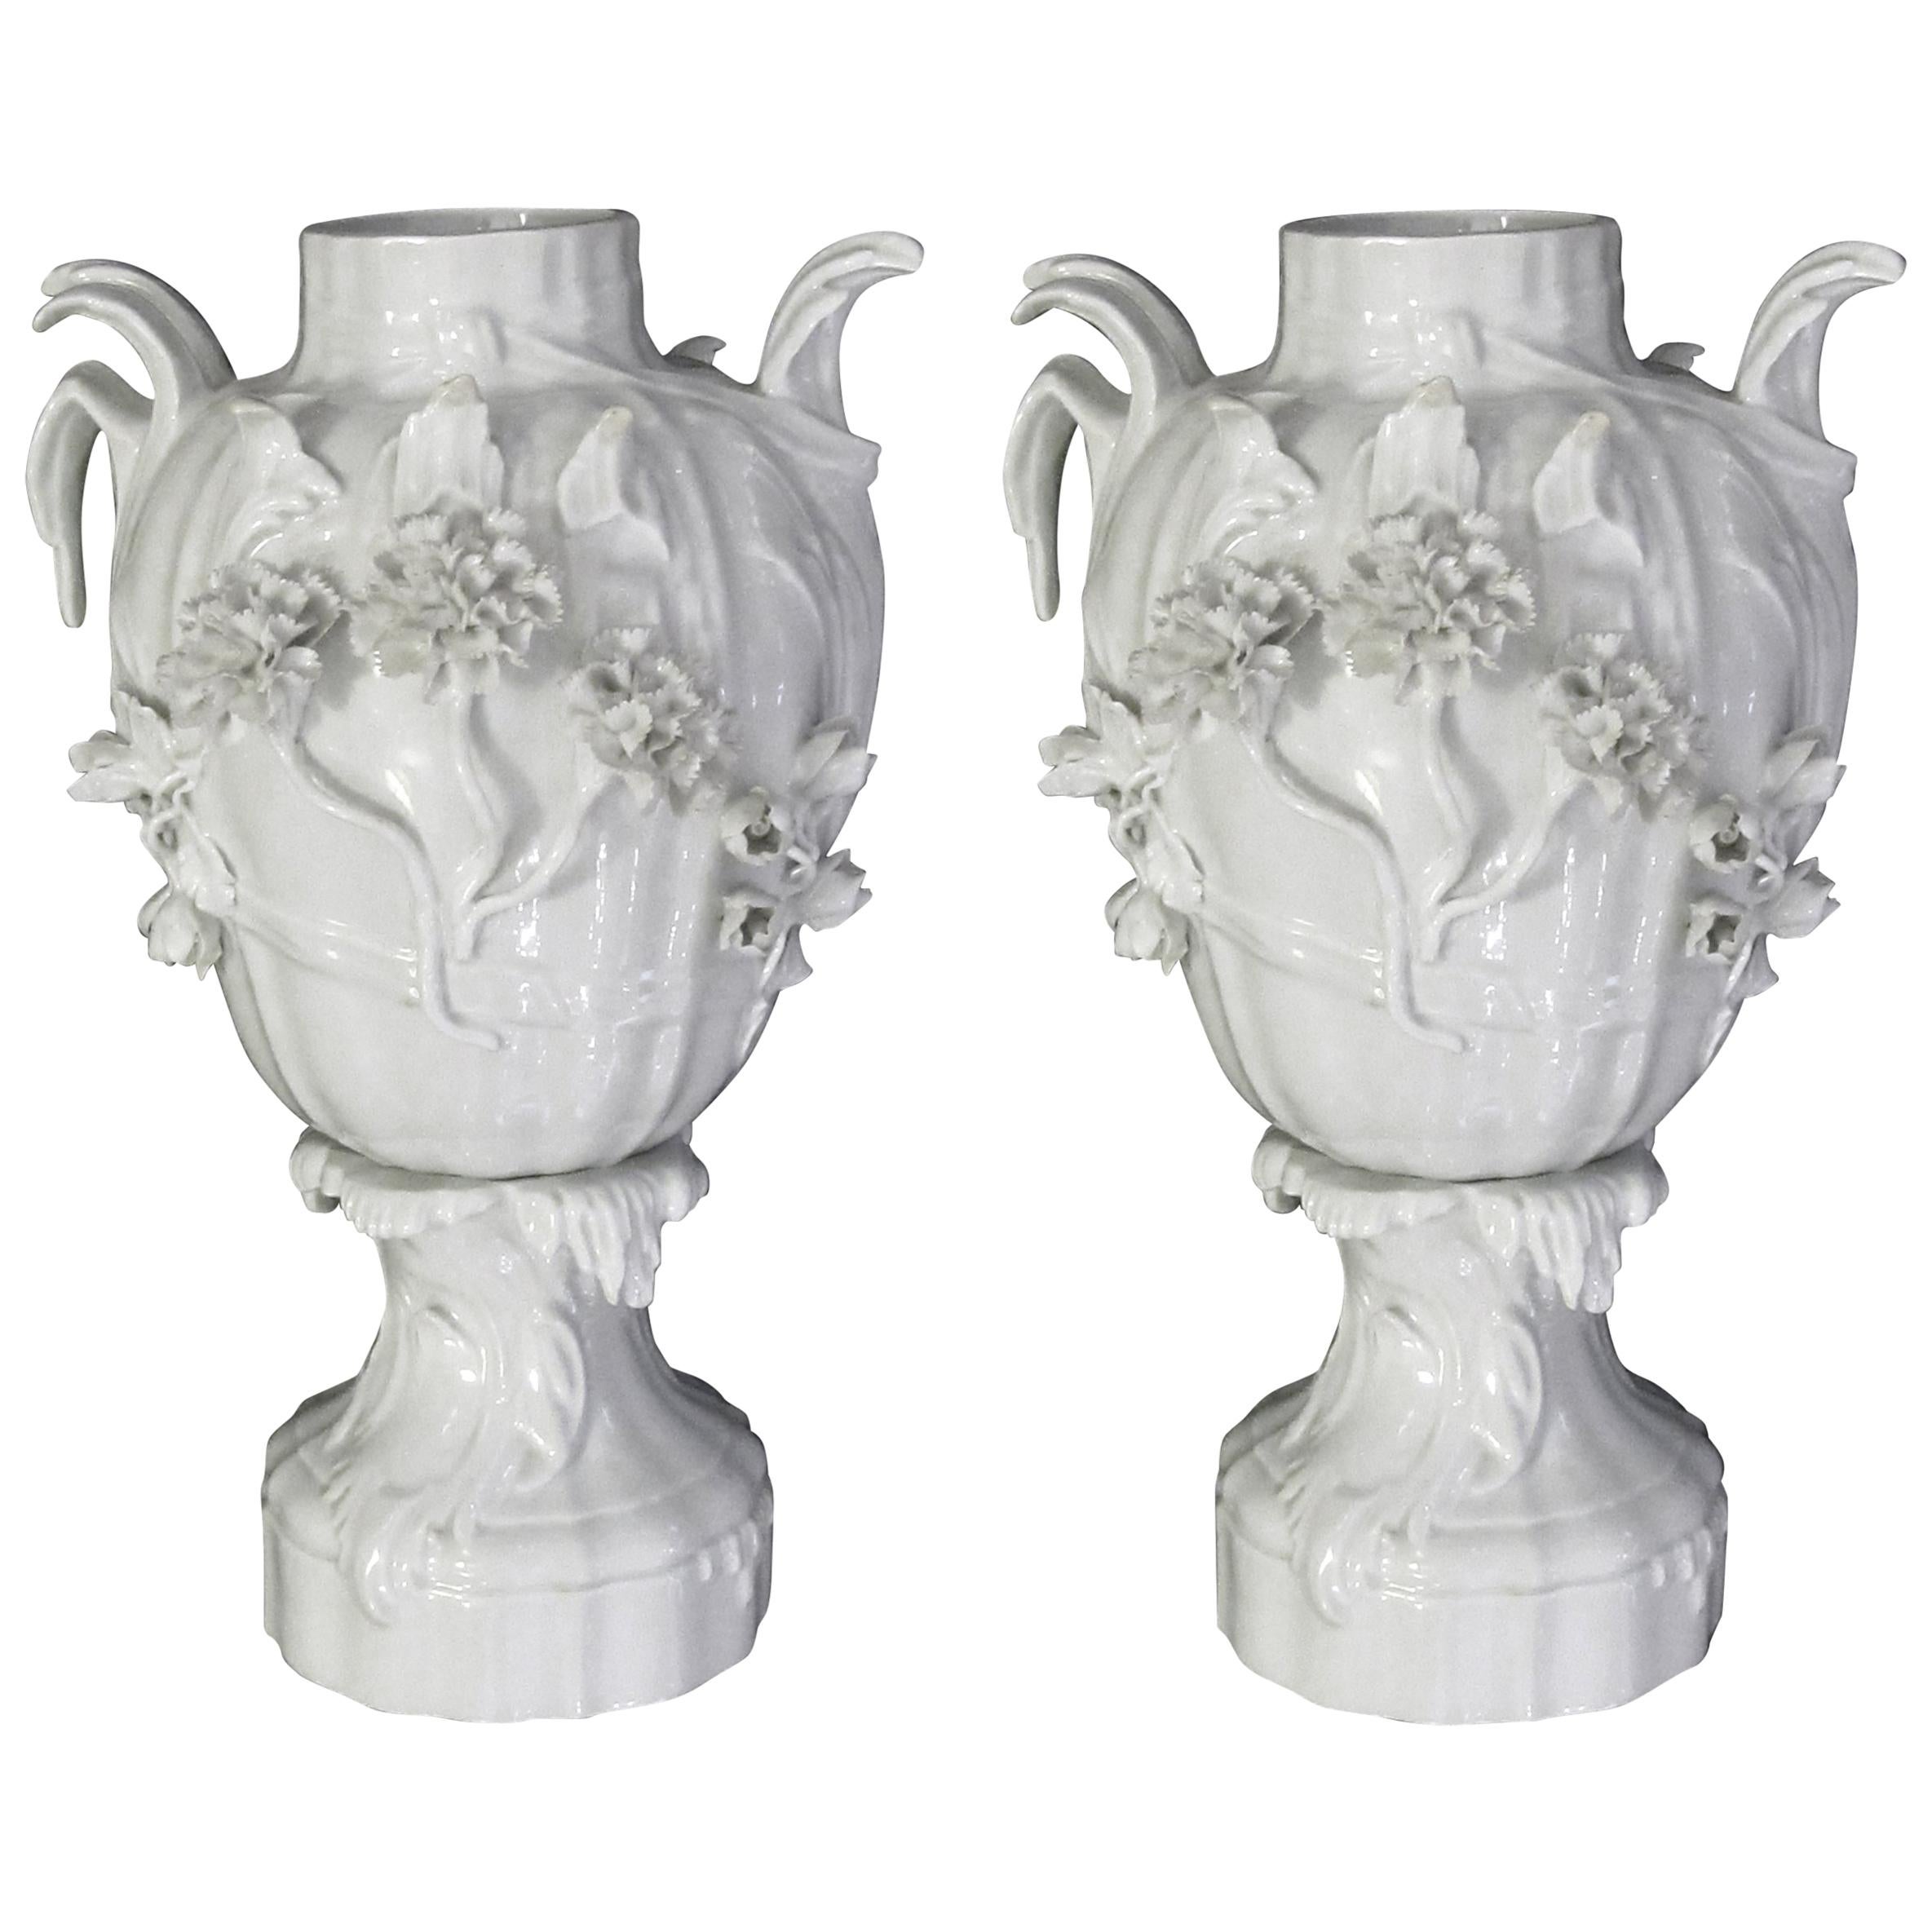 Finely Rendered Pair of French Rococo Style Blanc-de-chine Urns or Vases